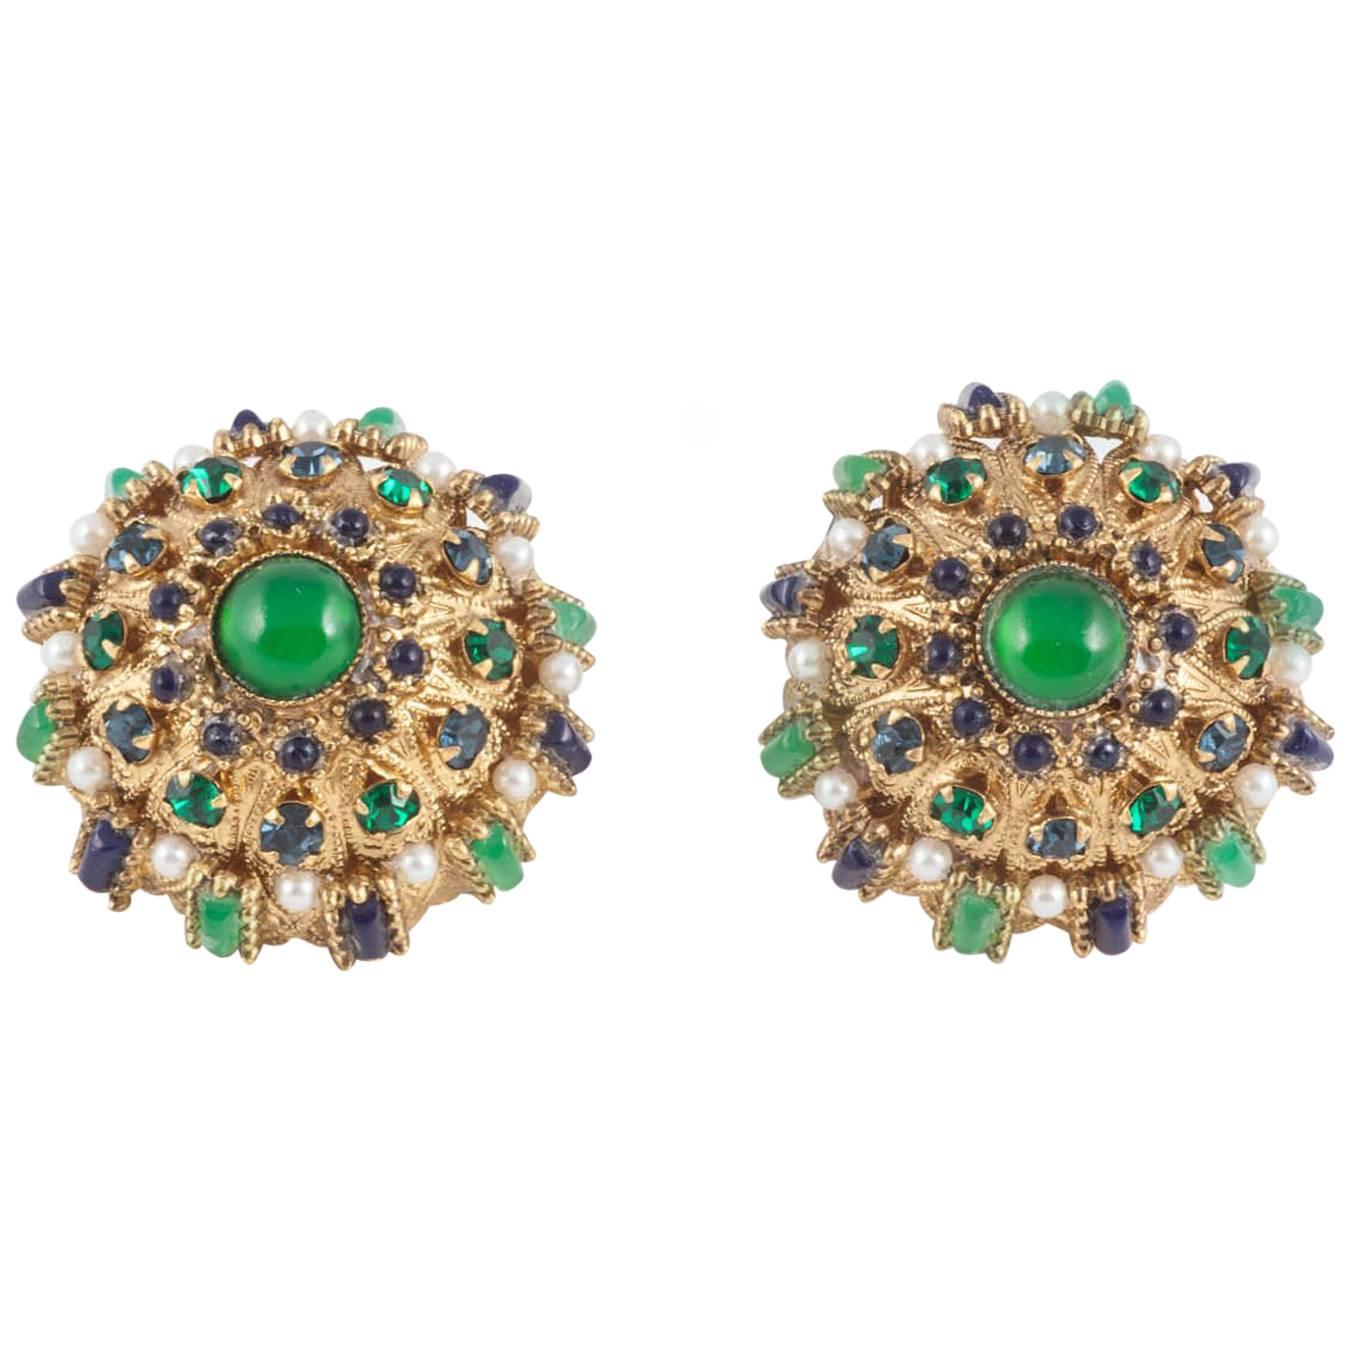 Glamorous domed jewelled paste earrings, French, 1960s